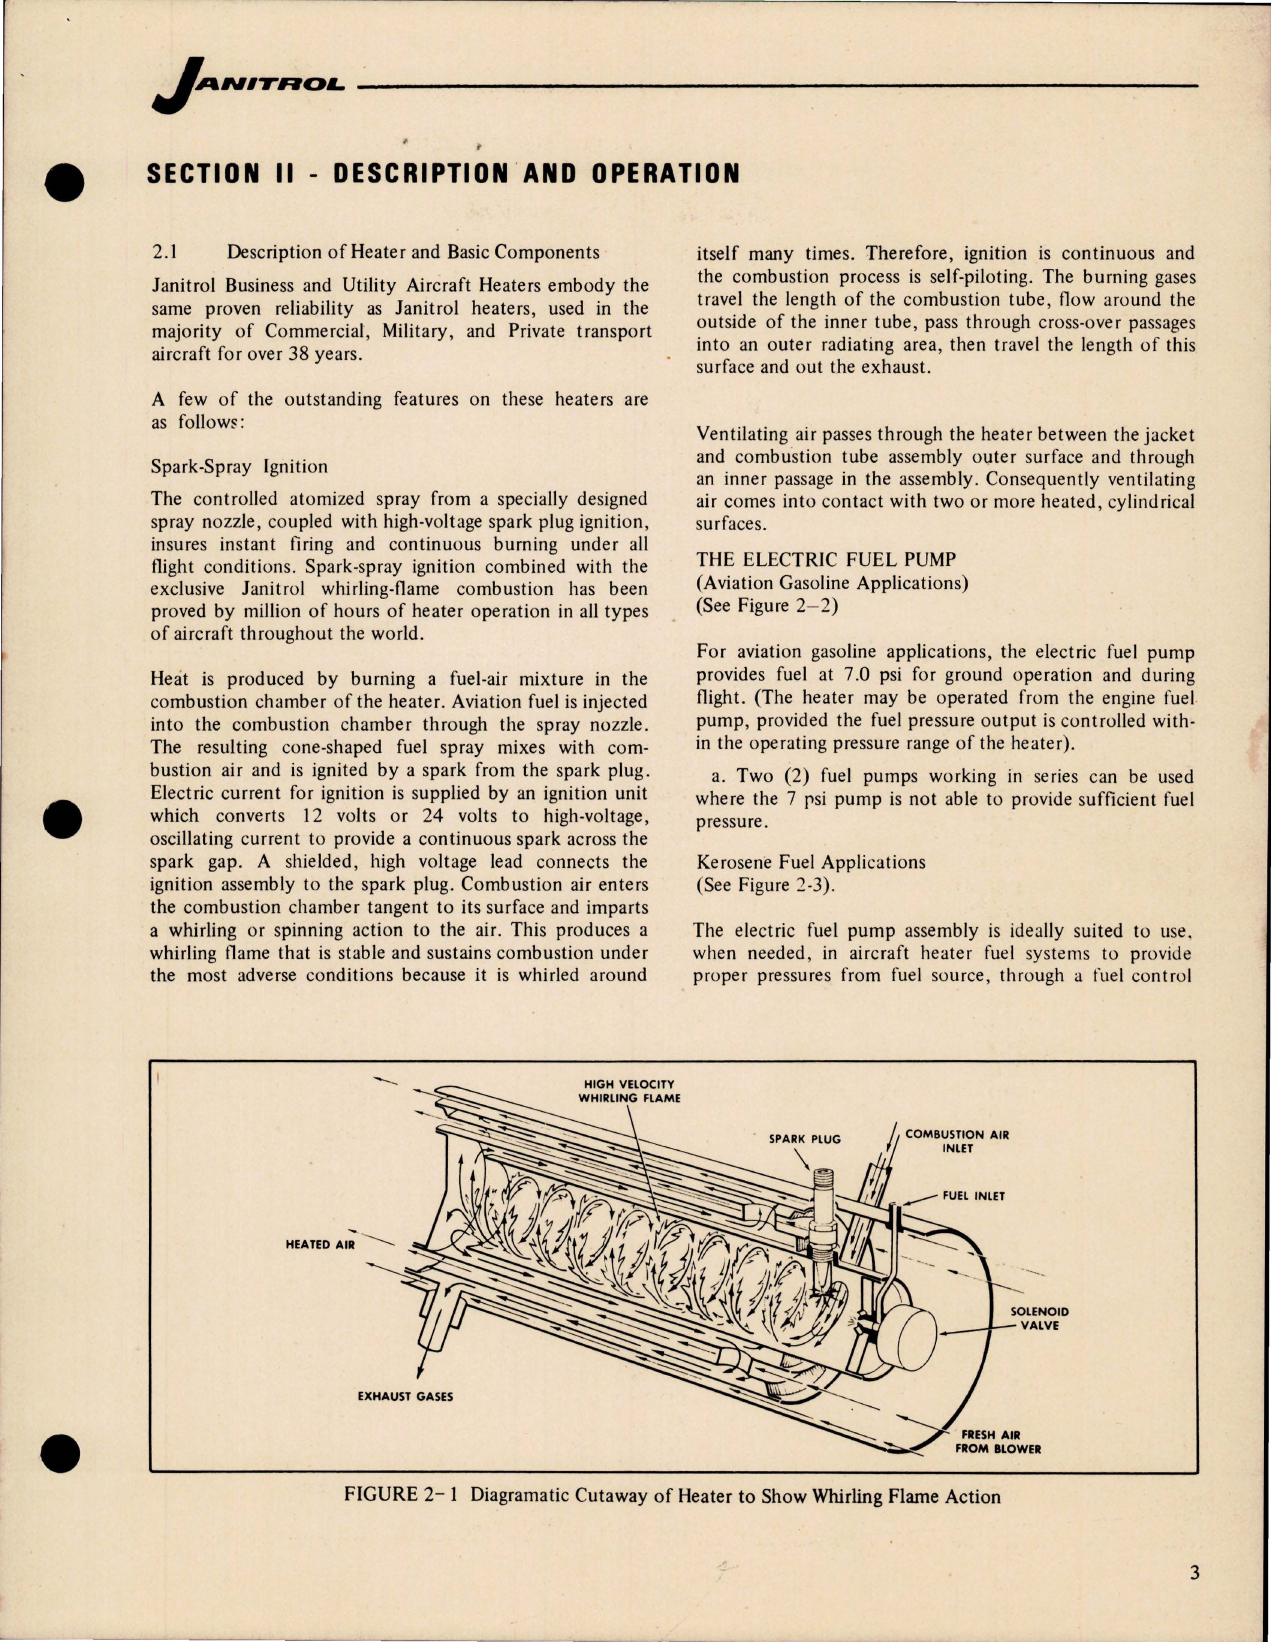 Sample page 7 from AirCorps Library document: Maintenance and Overhaul for Business and Utility Aircraft Heaters 